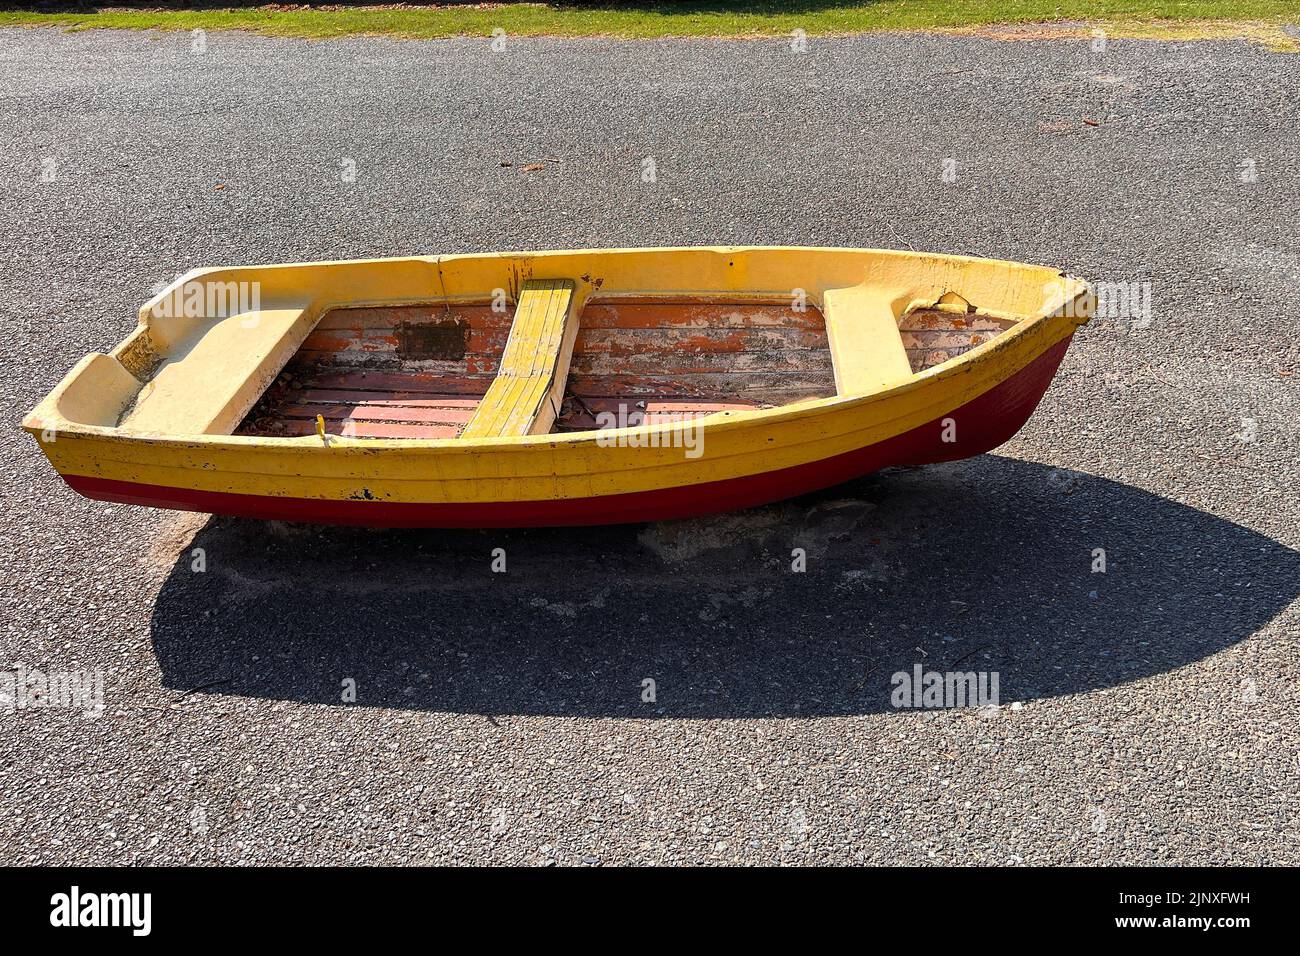 Small wooden boat parked on the street. Milan, Italy - August 2022 Stock Photo